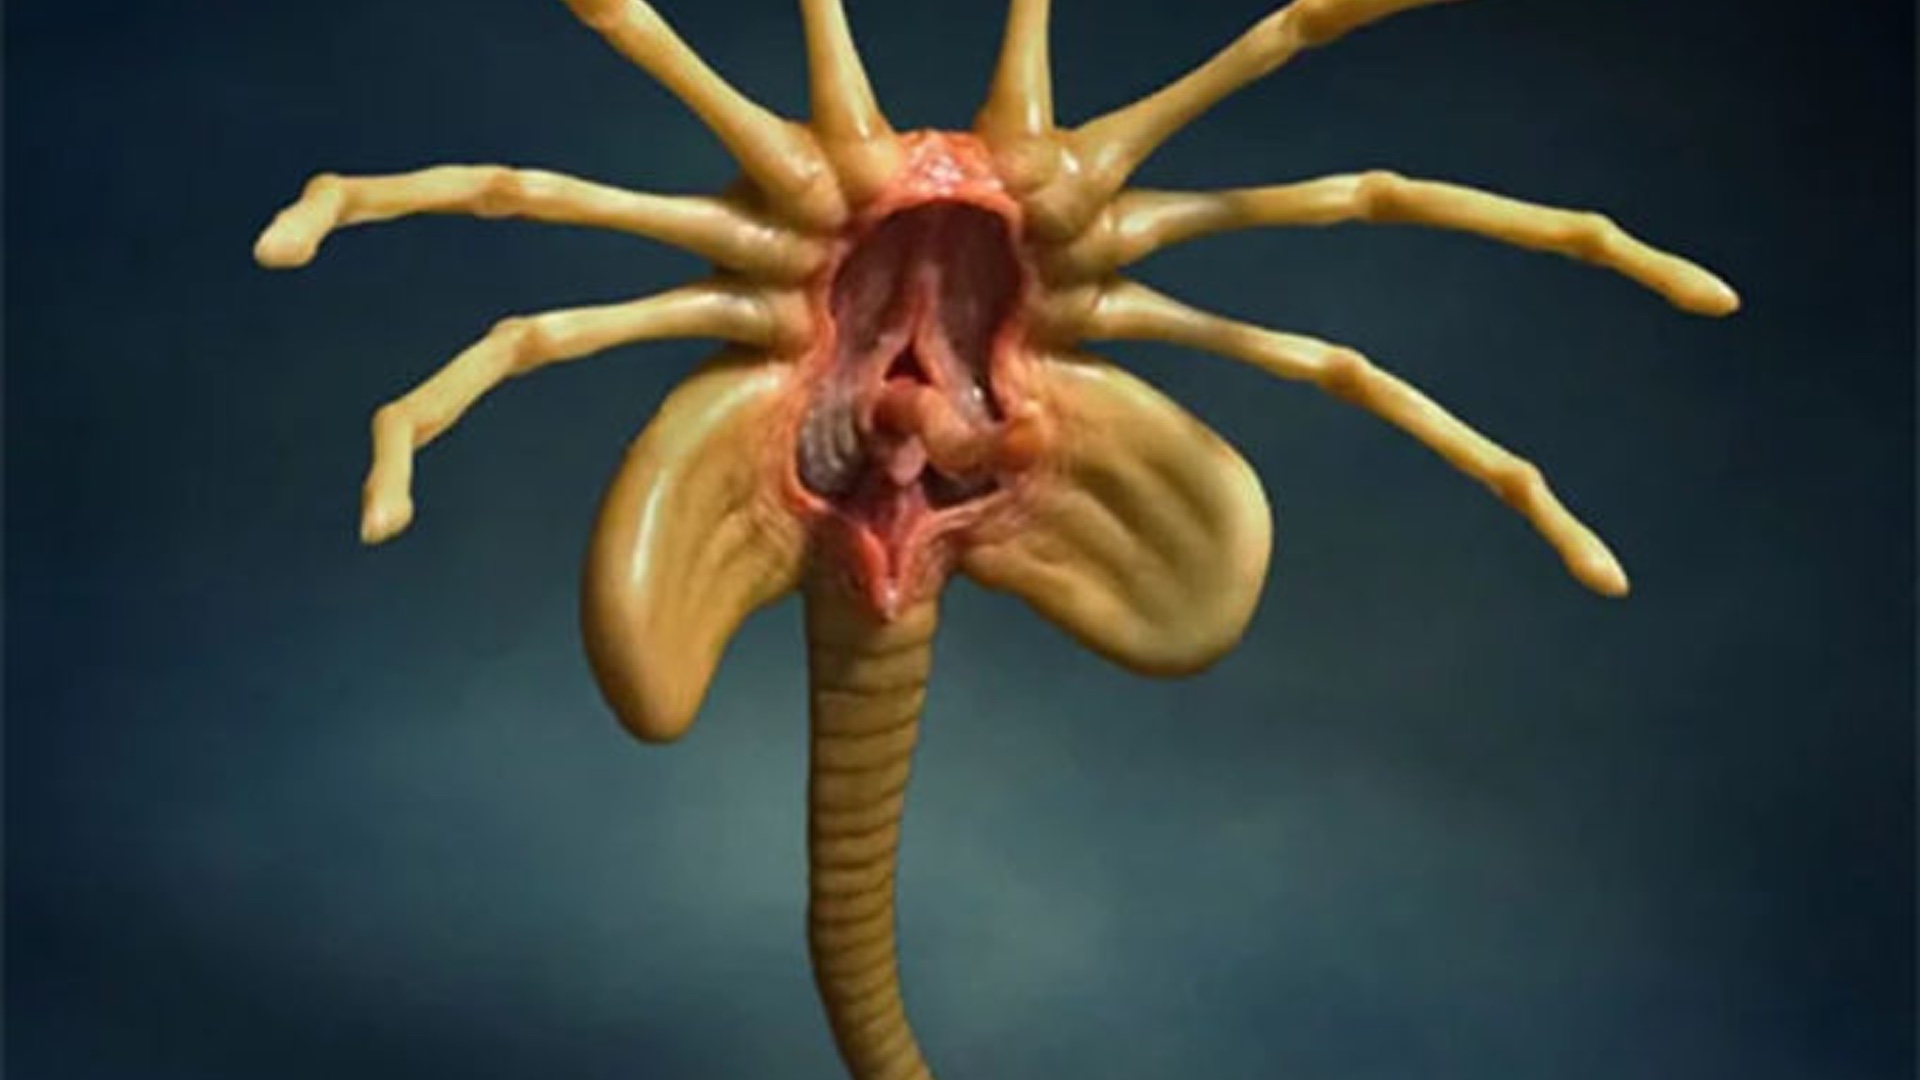 ALIEN Facehugger Replica will Turn Your Desk Into a Nightmare.